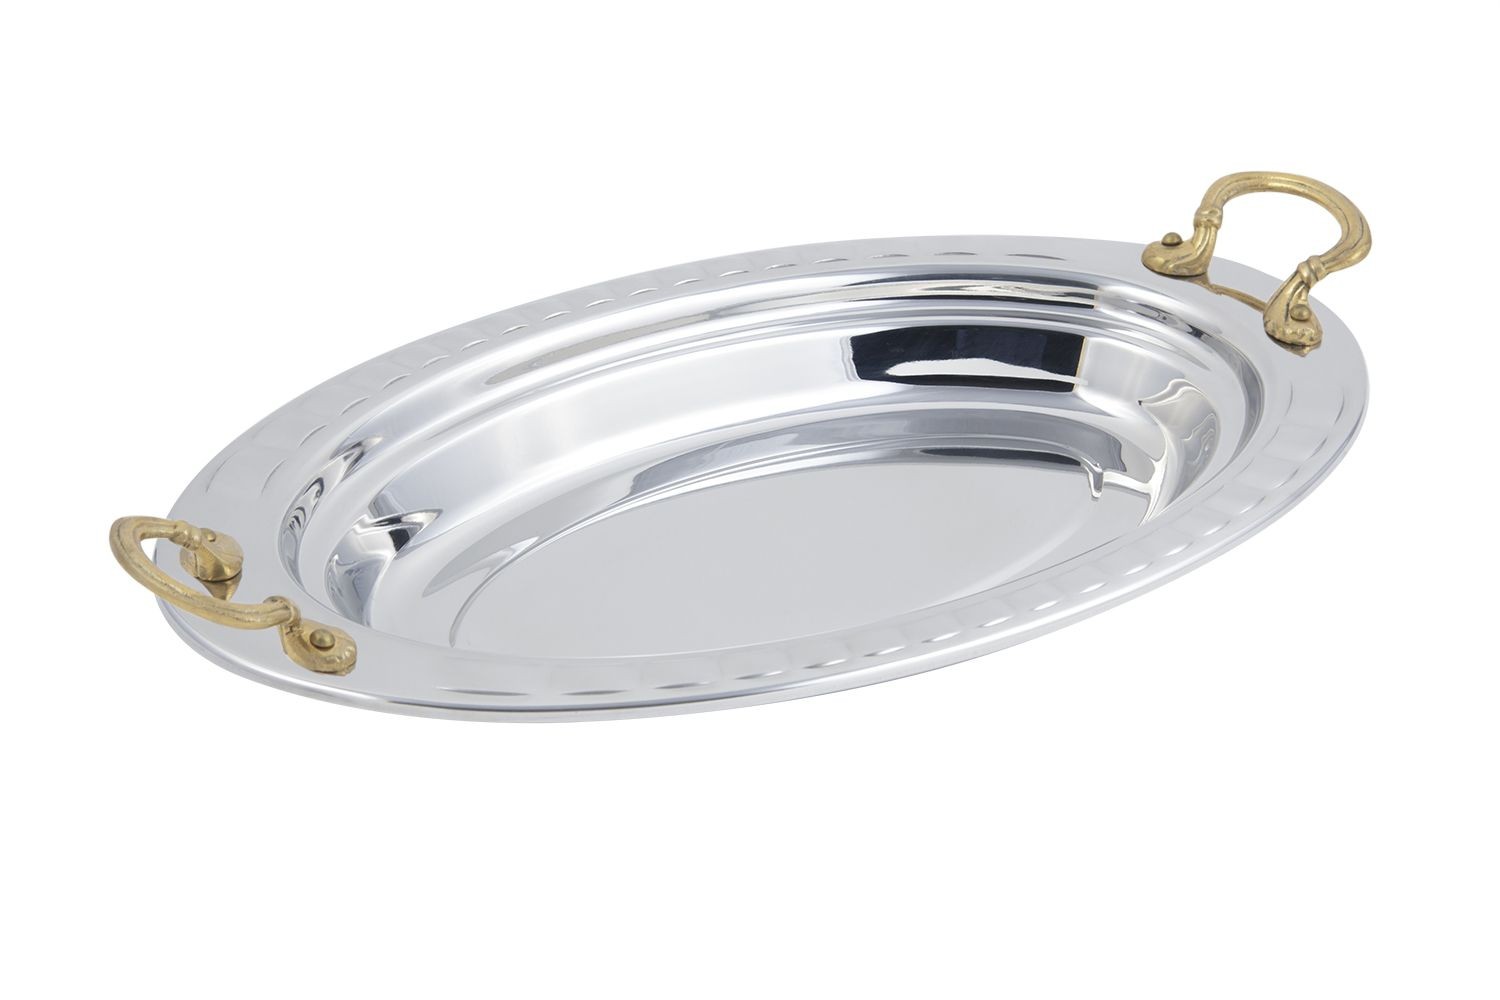 Bon Chef 5688HR Arches Design Oval Pan with Round Brass Handles, 2 1/2 Qt.